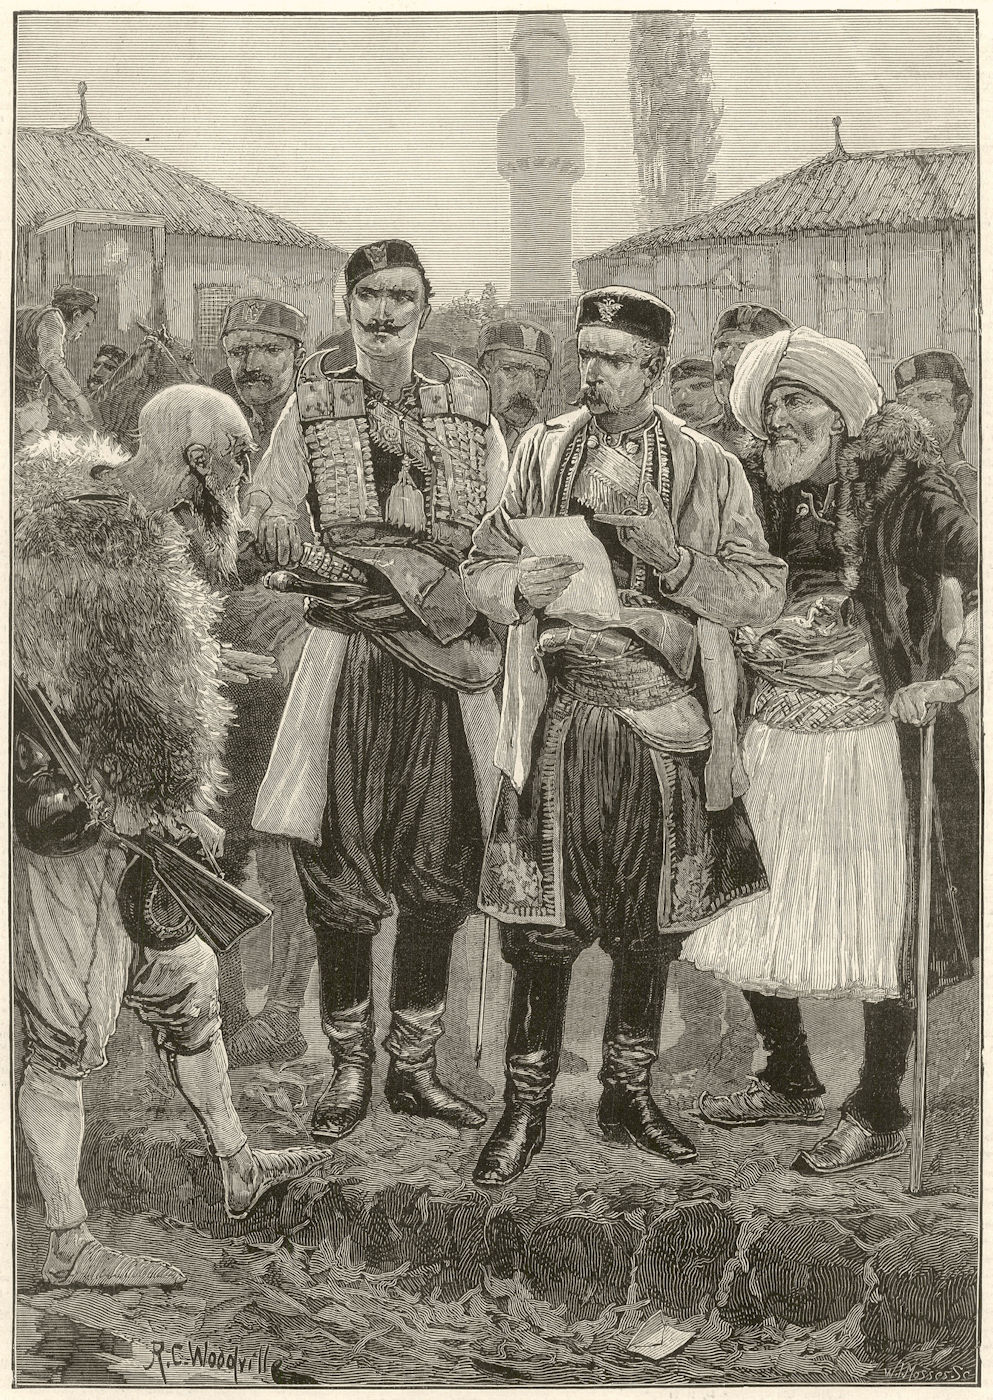 The Albanian Question: Montenegrin Minister of War at Podgorica. Montenegro 1880